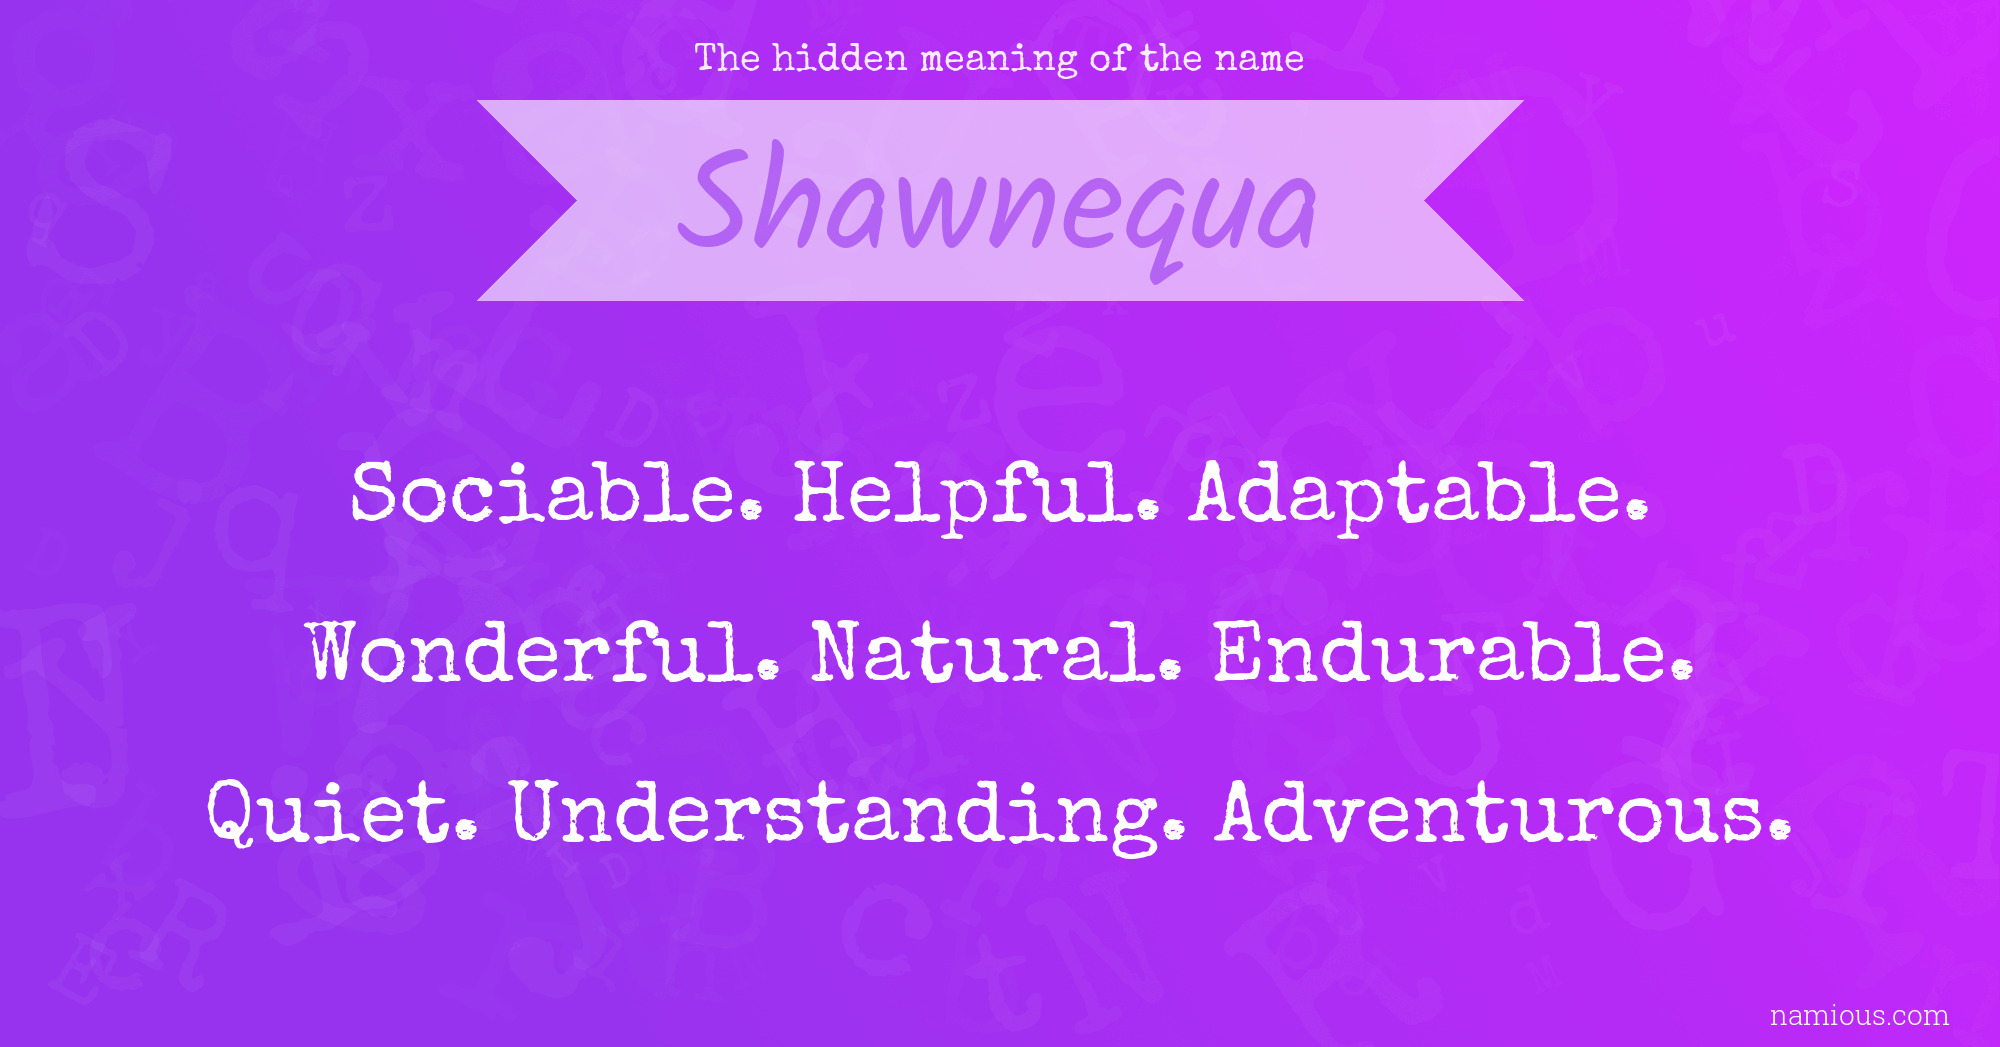 The hidden meaning of the name Shawnequa